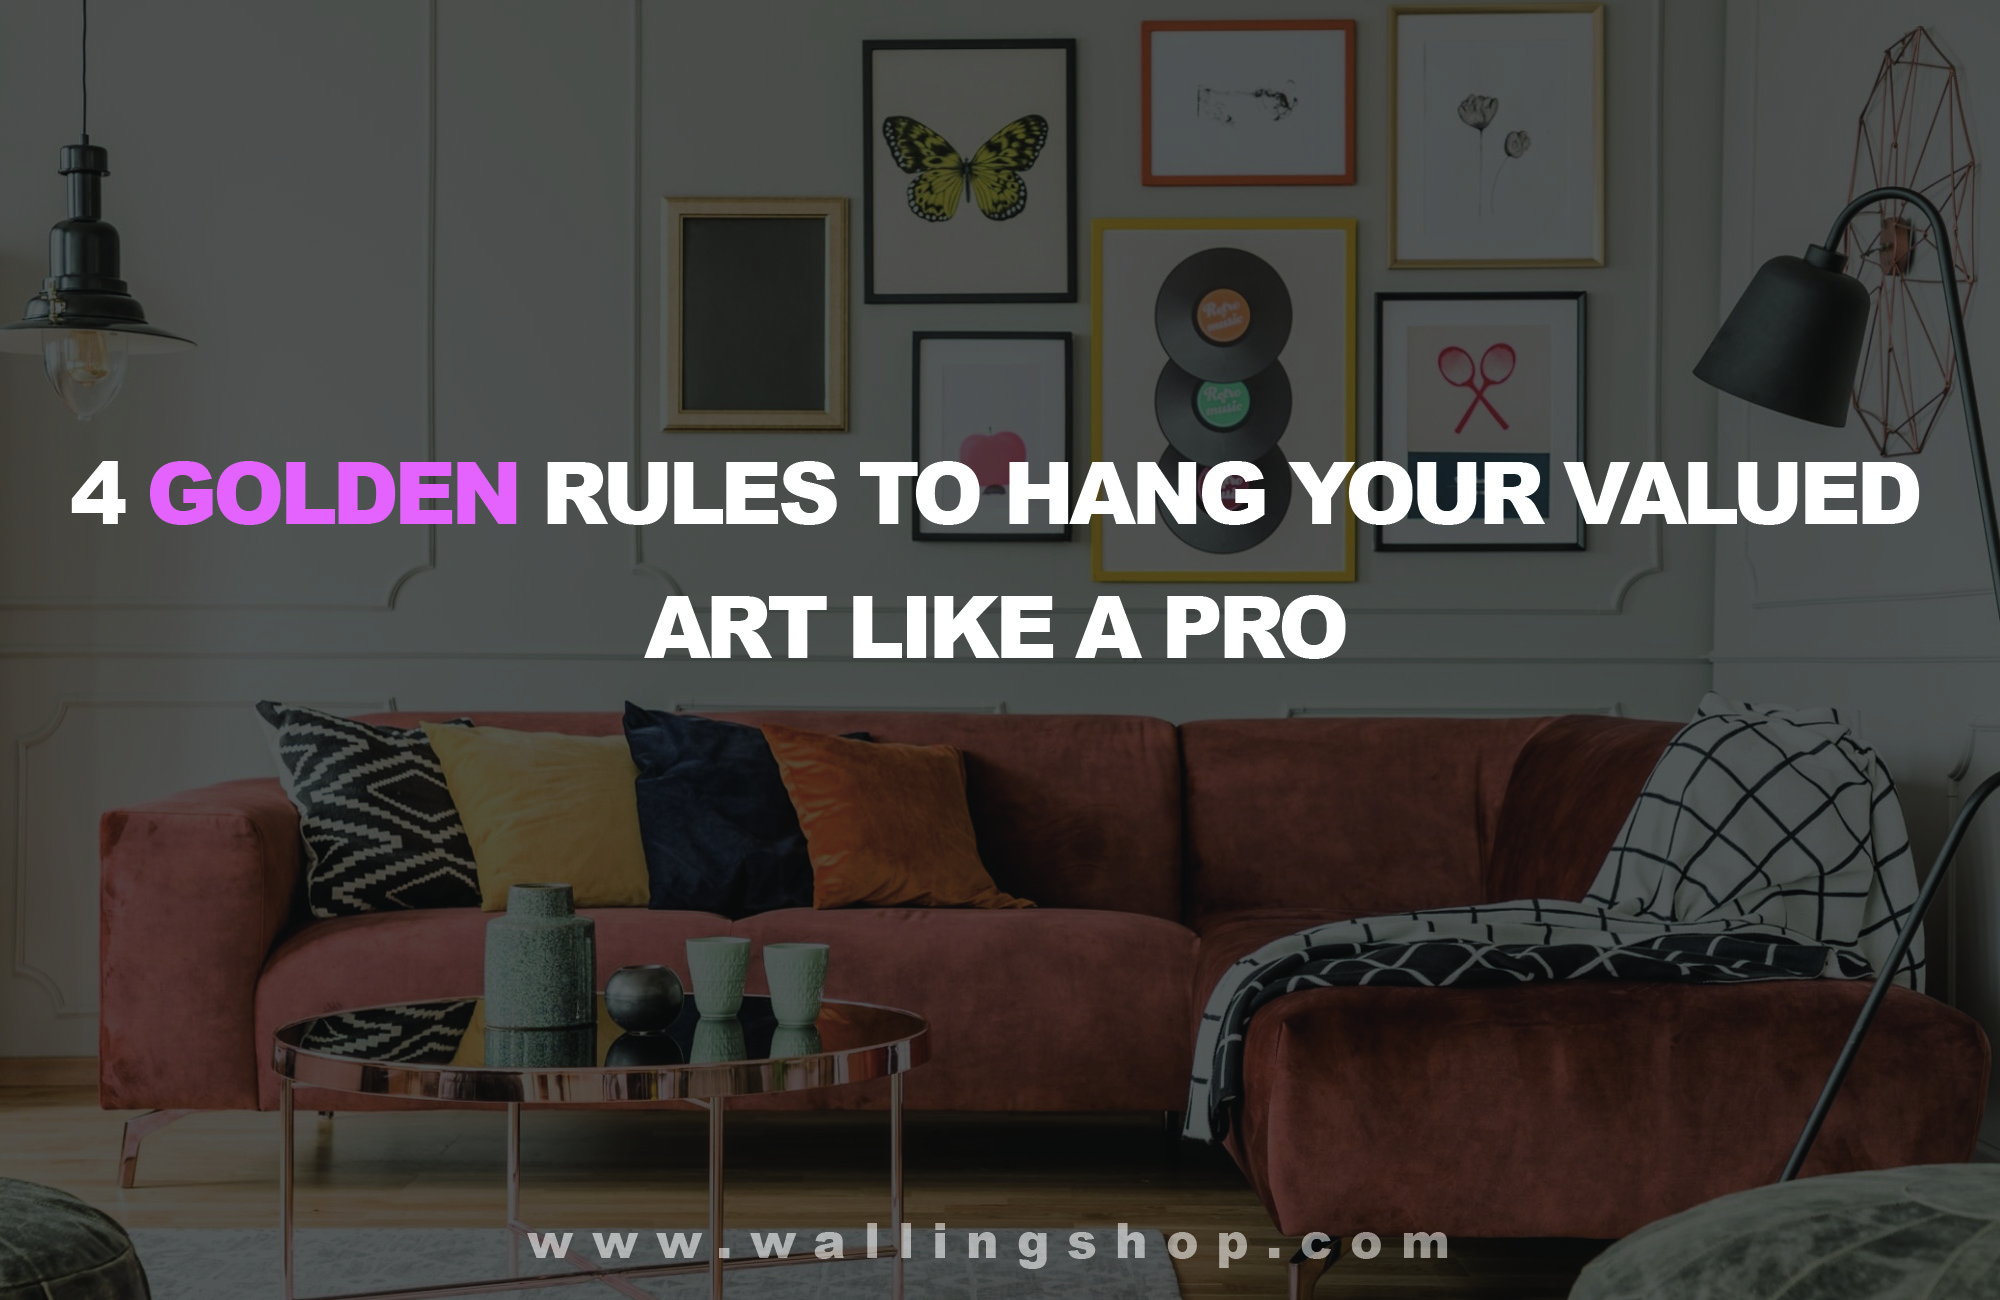 4 Golden Rules To Hang Your Valued Art Like A Pro.